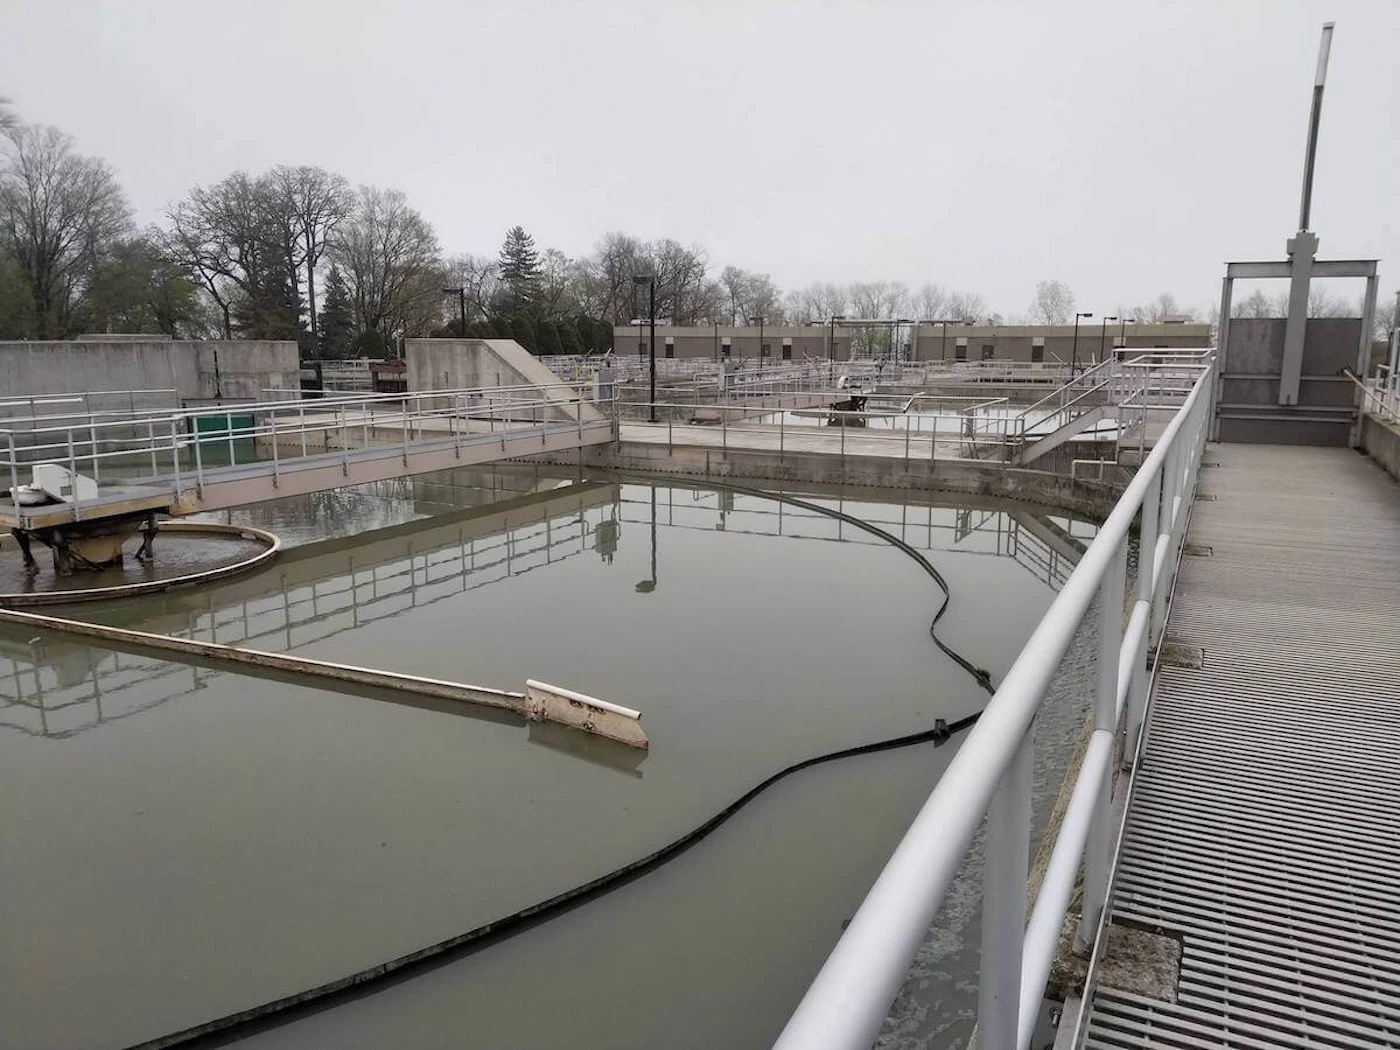 The Sheboygan wastewater treatment plant is seen in this May 2018 photo posted on the city's Facebook page.